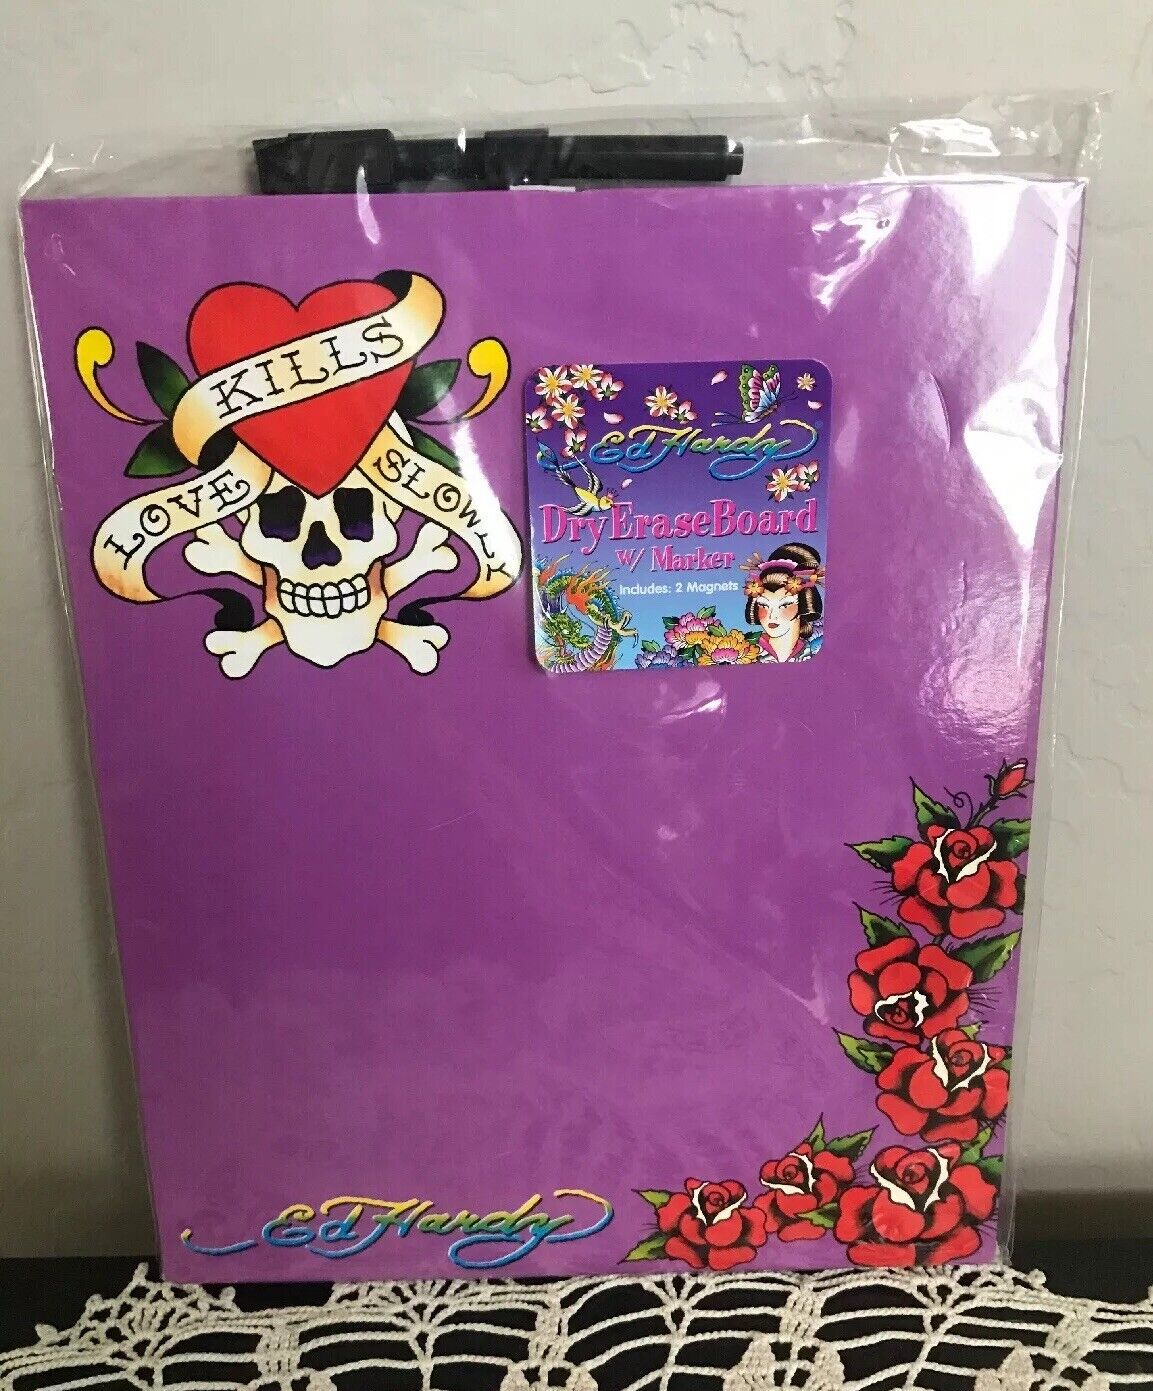 Ed Hardy Dry Outlet SALE Erase Board w Marker by PU FRANK 2 Max 76% OFF LISA Magnets and